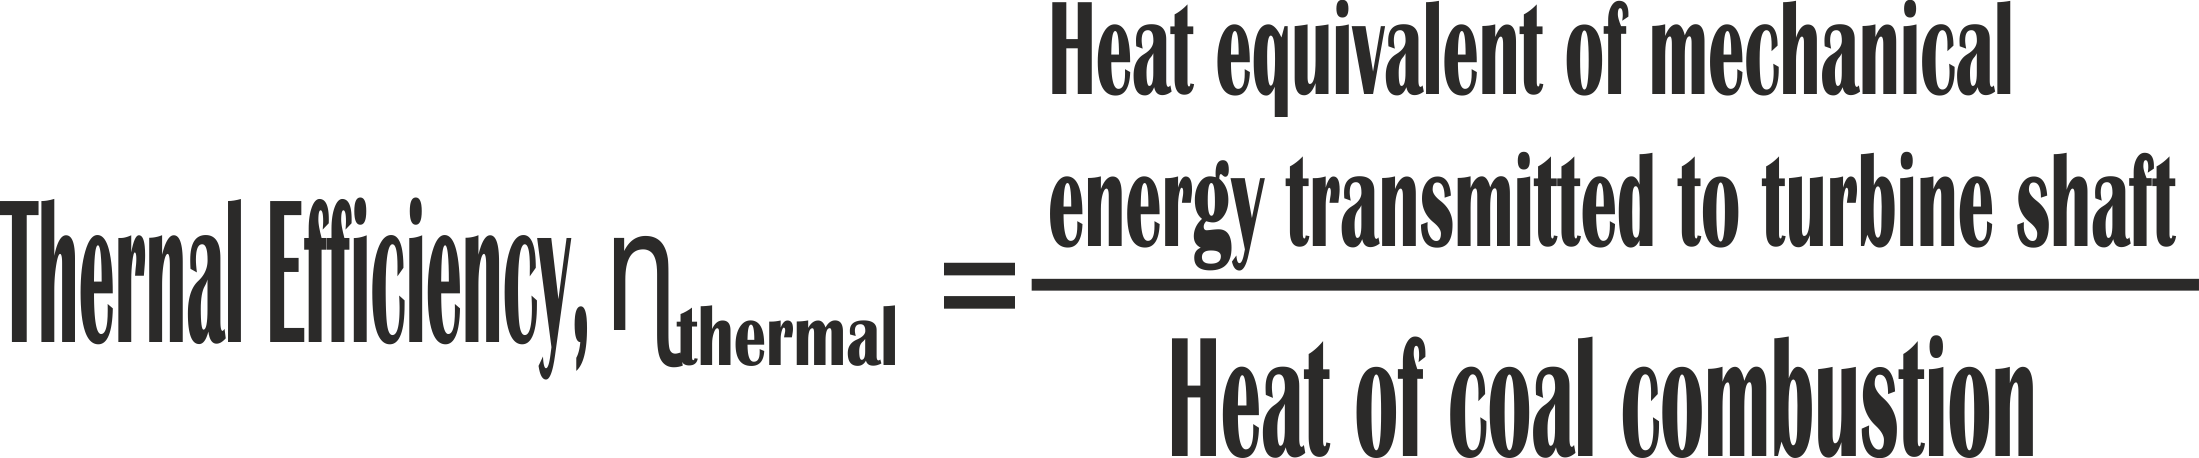 at klemme vand et eller andet sted Thermal Power Plant Efficiency | Thermal Efficiency and Overall Efficiency  of Thermal Power Plant | MechanicalTutorial